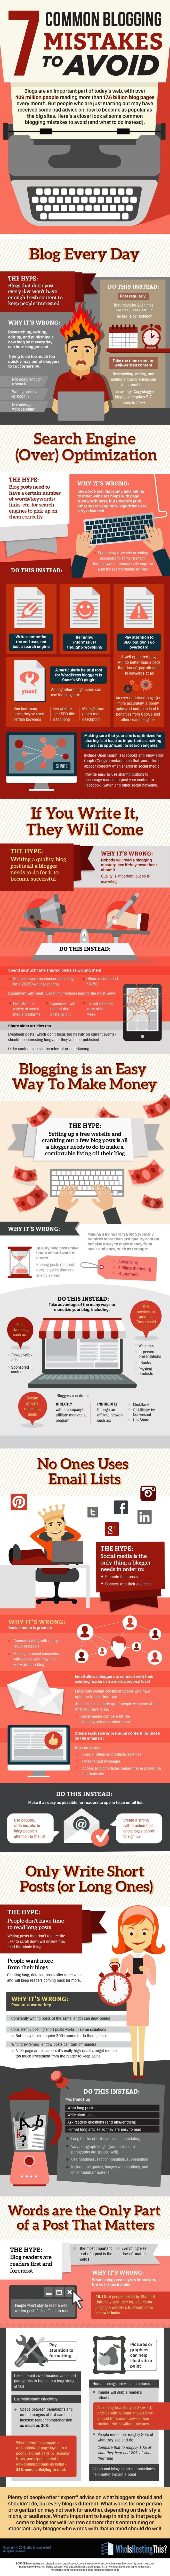 7 Common Blogging Mistakes To Avoid &#8211; infographic